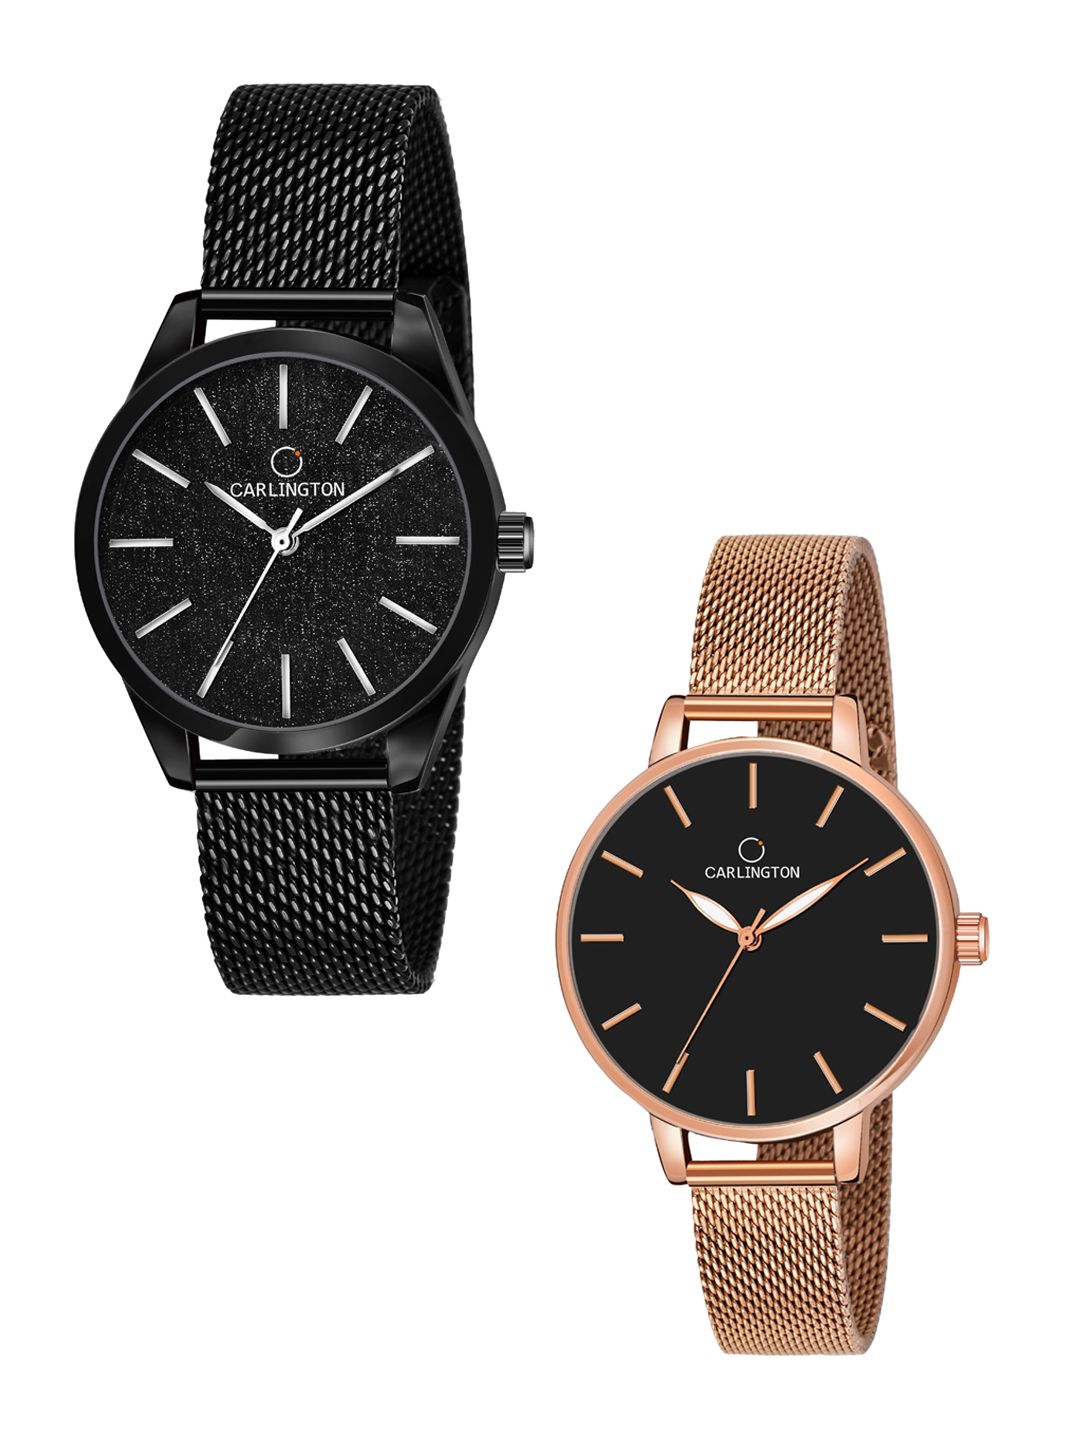 CARLINGTON Unisex Pack Of 2 Multicoloured Analogue Watch-CT2001 Black-CT2014 RoseBlack Price in India